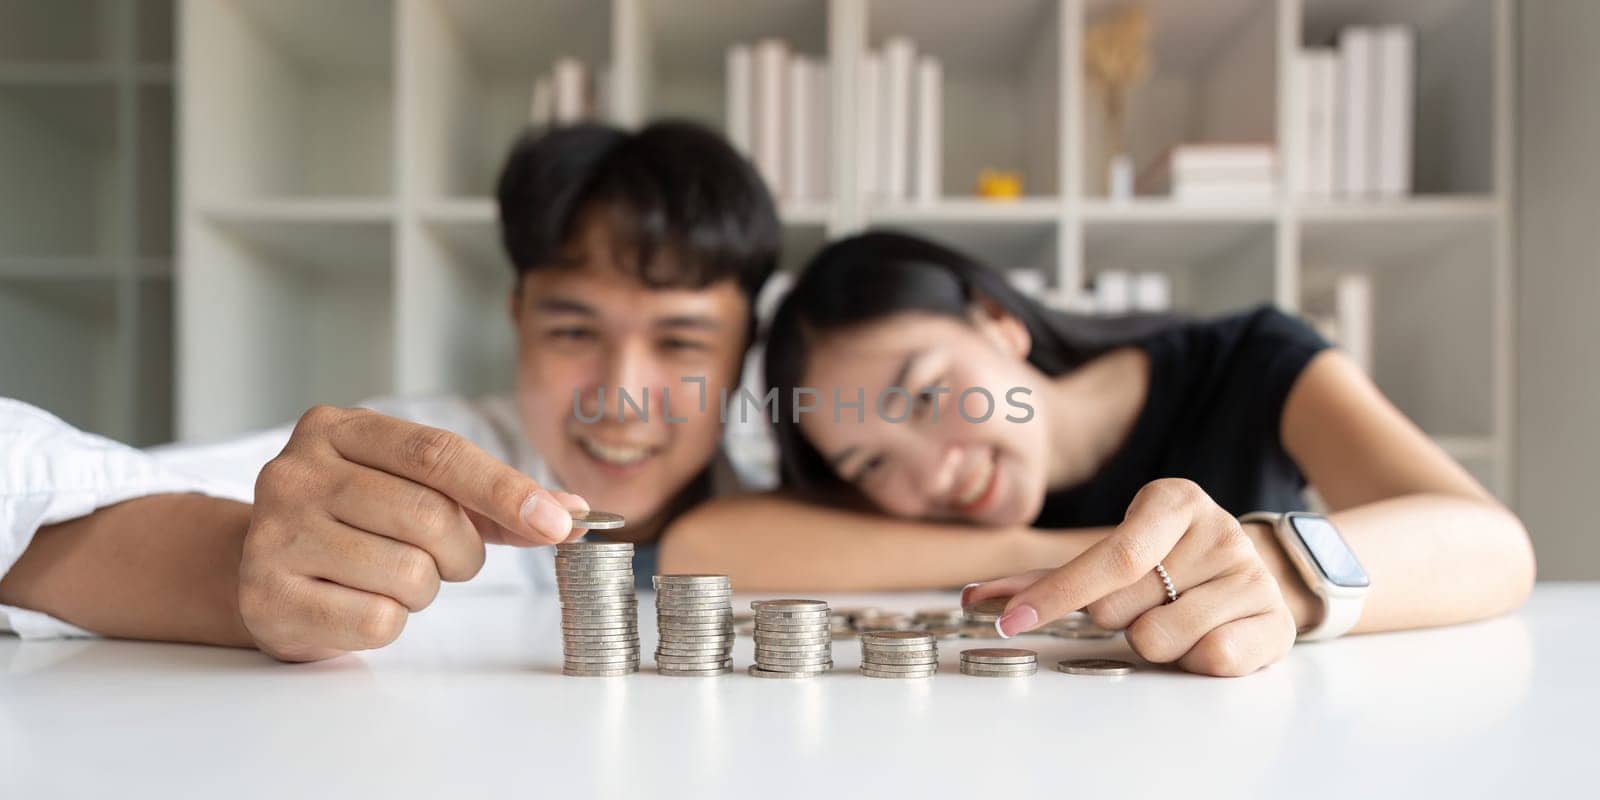 Saving money investment for future. Asian couple counting save money plan future budget. Saving investment banking concept by nateemee